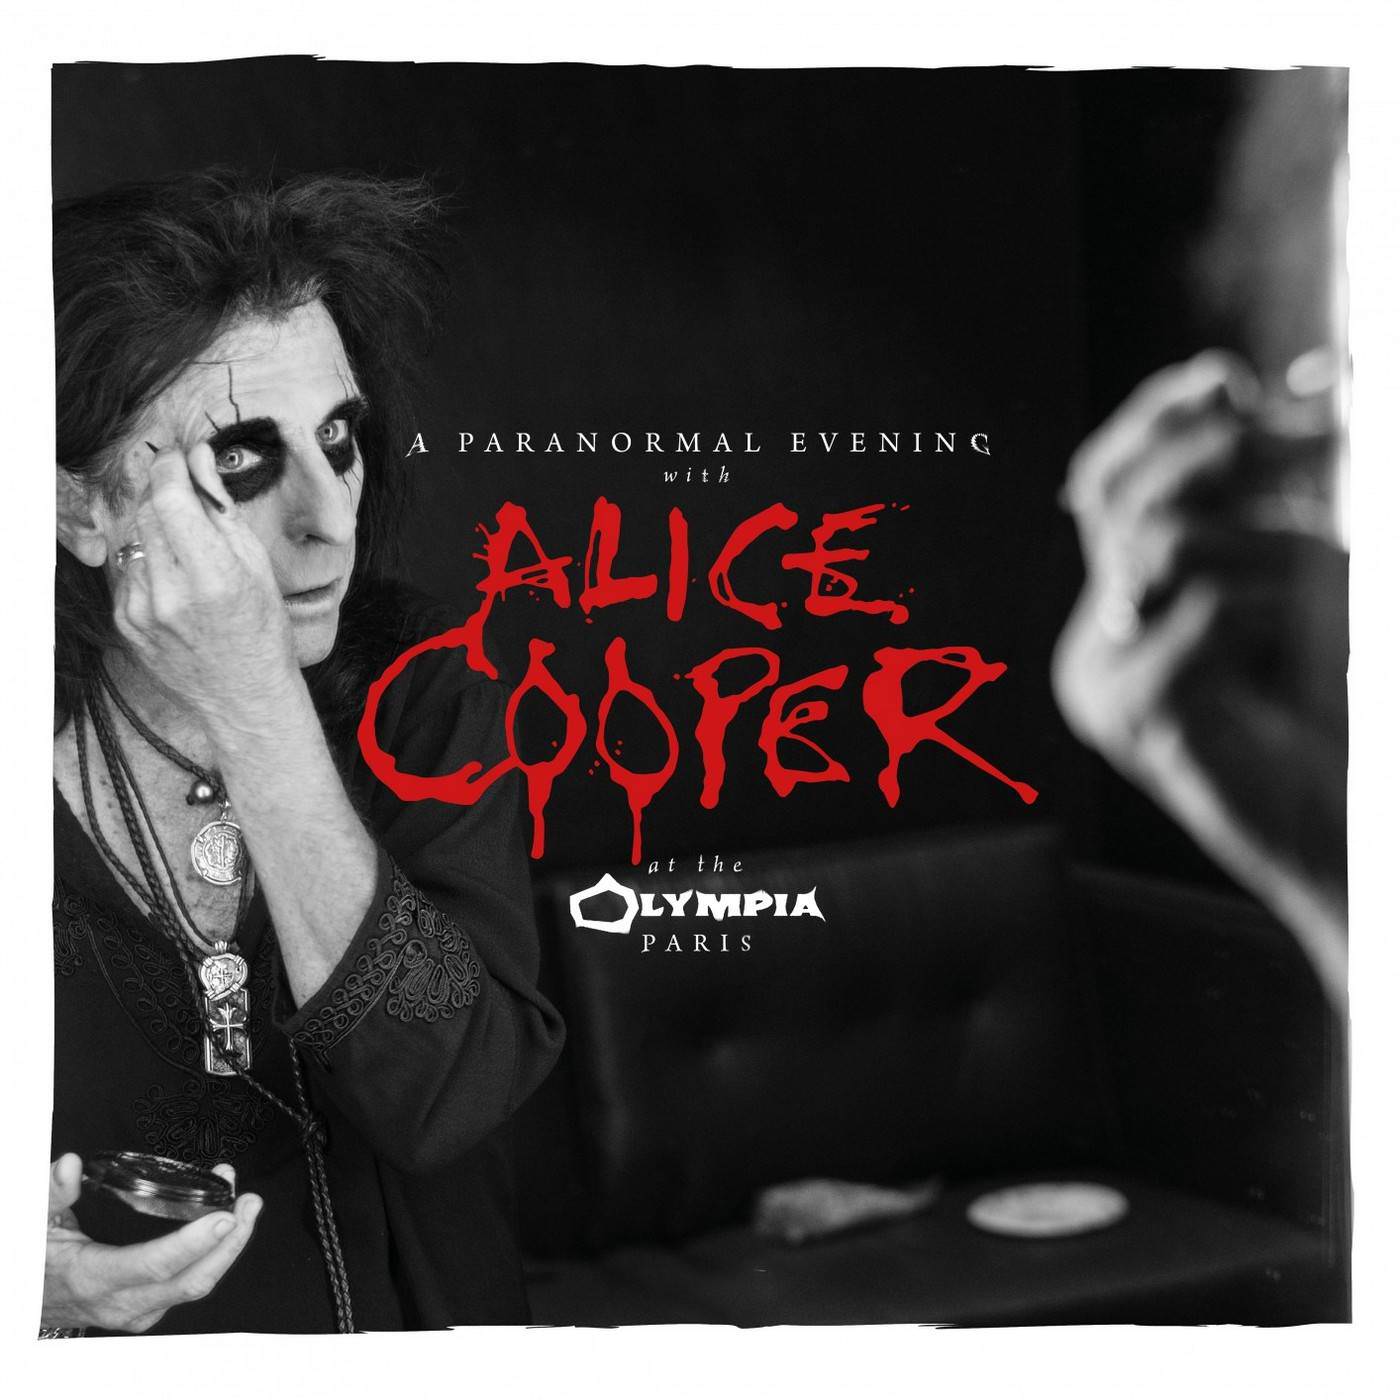 Alice Cooper - A Paranormal Evening at the Olympia Paris (2018) [FLAC 24bit/48kHz]